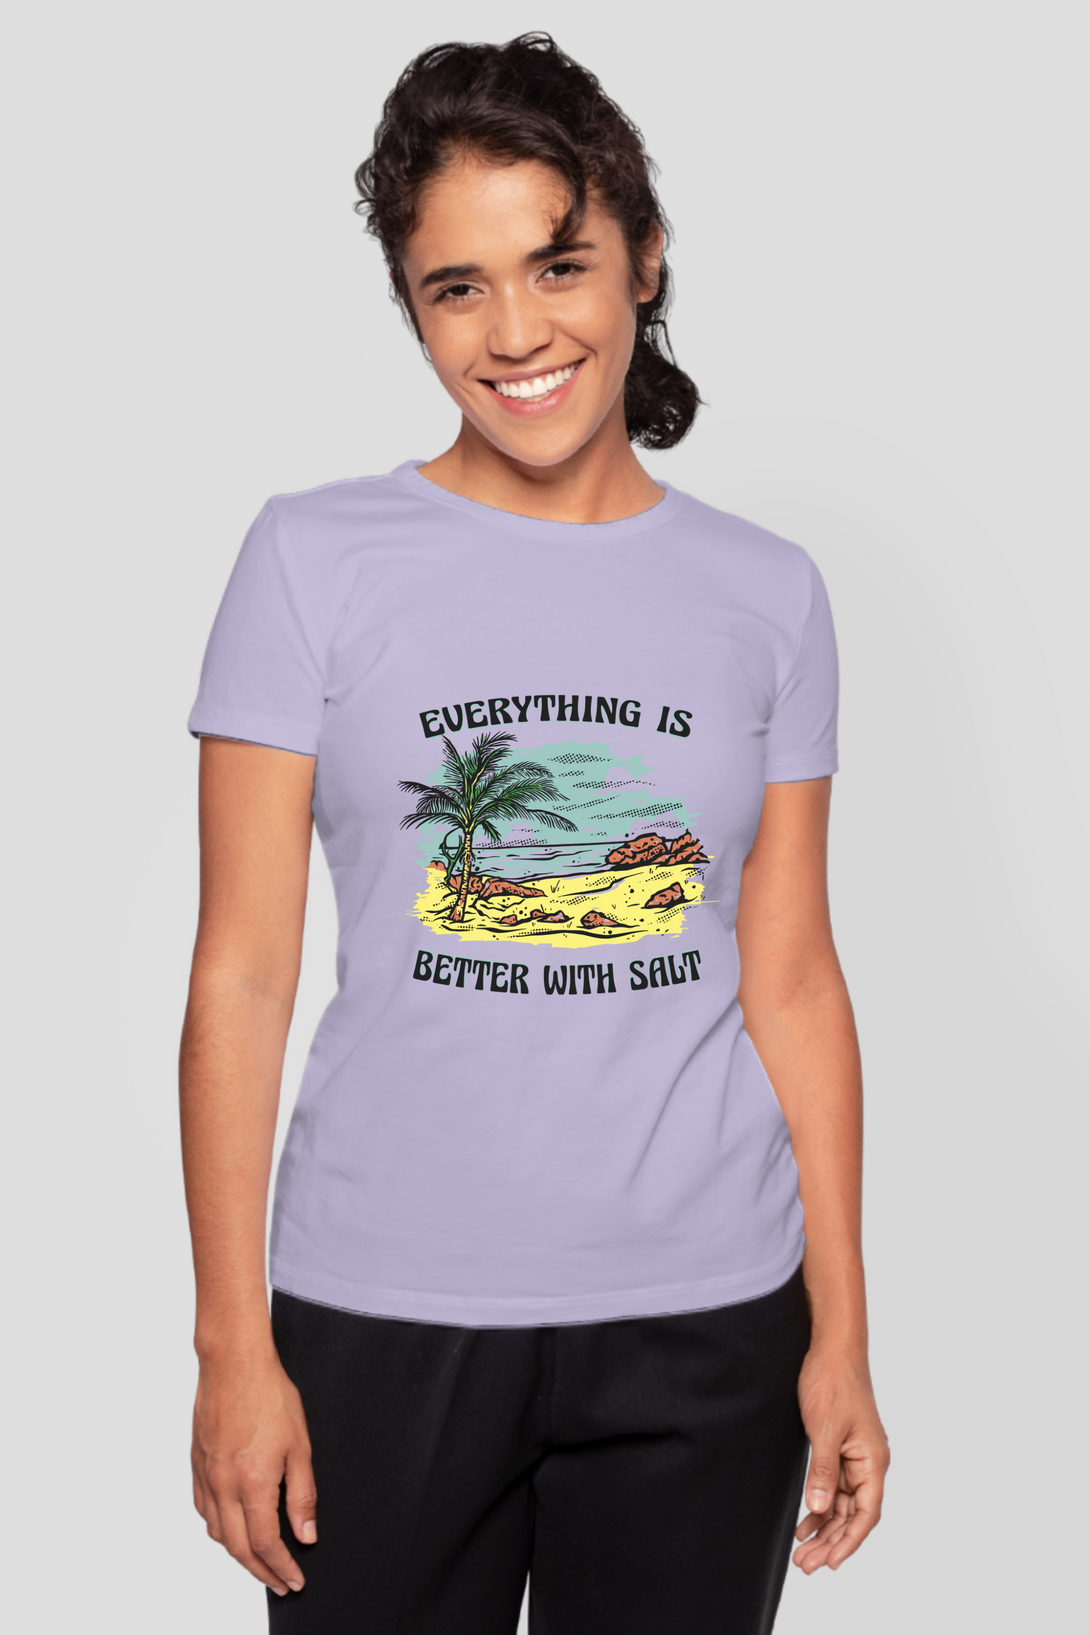 Everything Is Better With Salt Printed T-Shirt For Women - WowWaves - 13